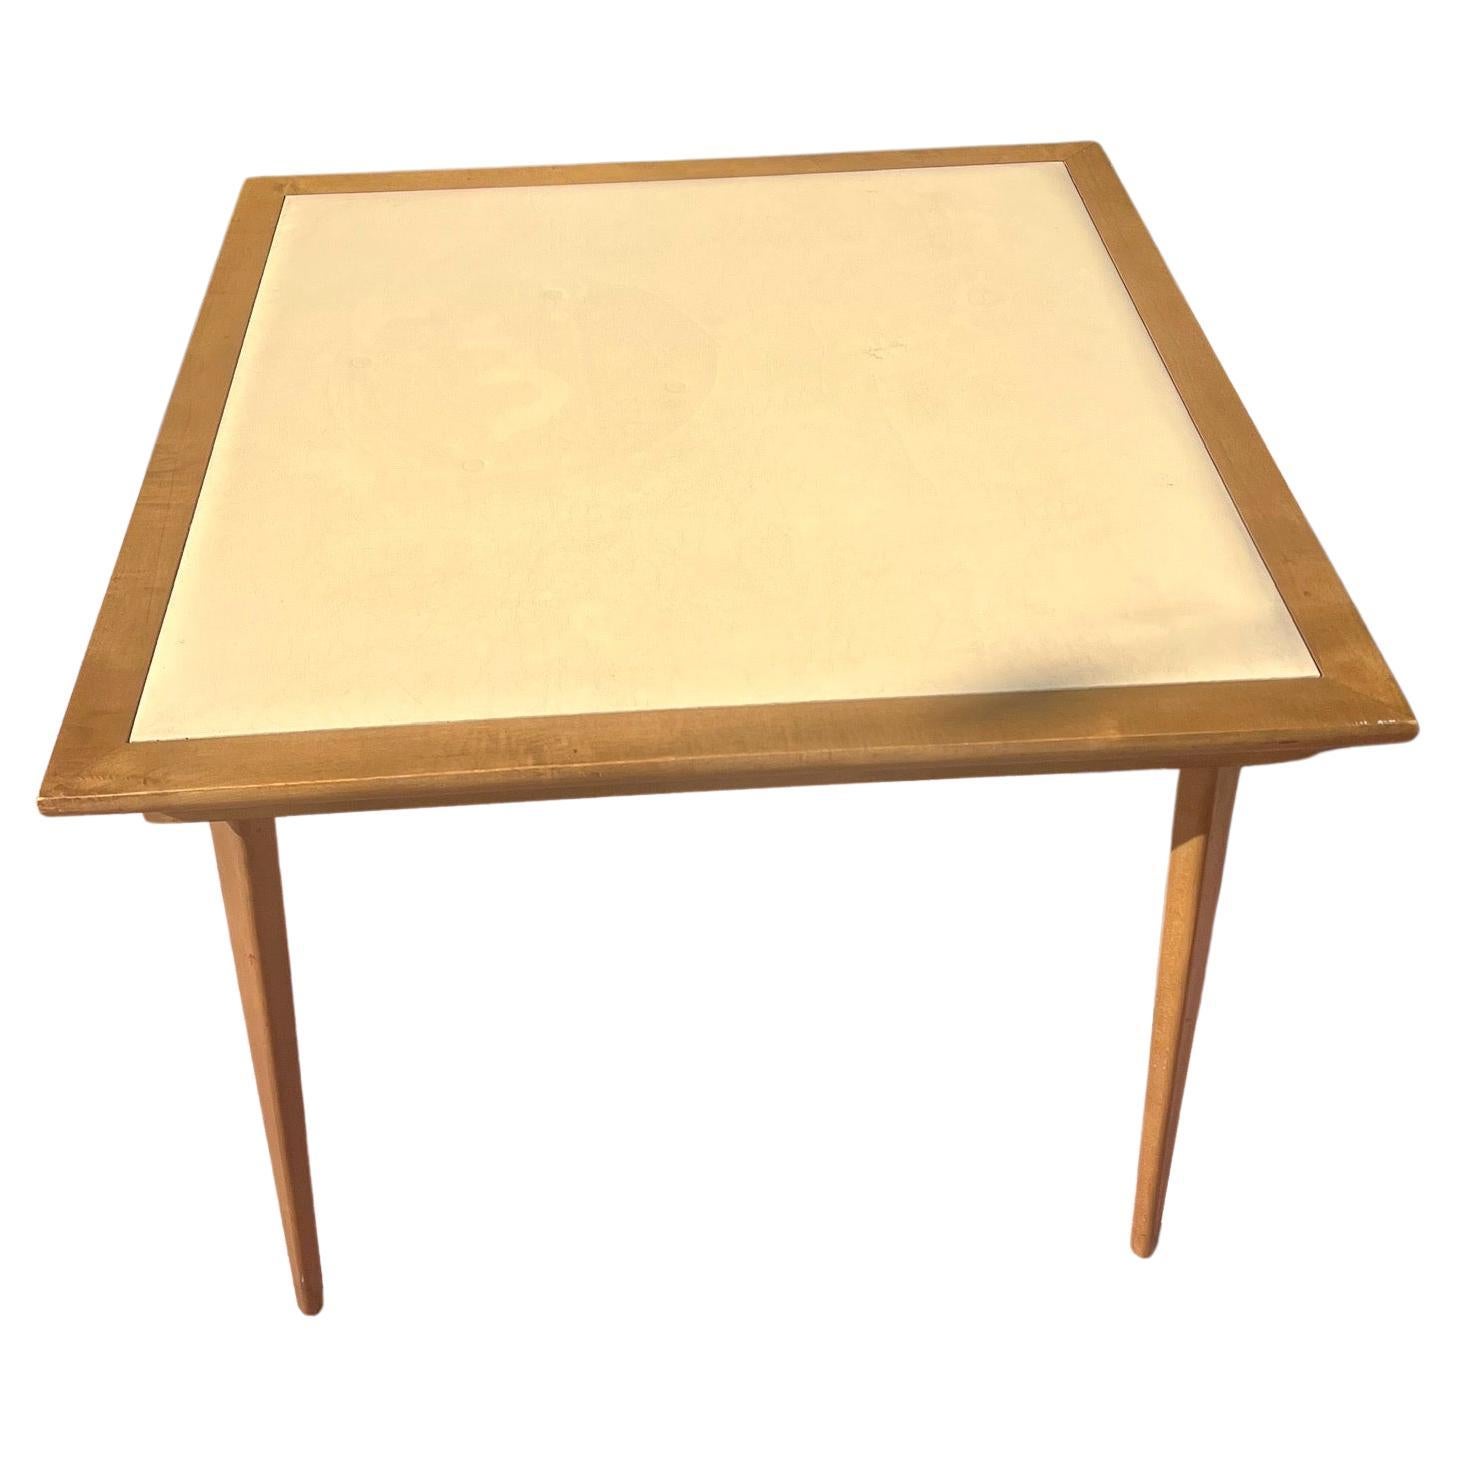 1950's American Mid Century atomic Age Folding Table in Walnut & Naugahyde In Good Condition For Sale In San Diego, CA